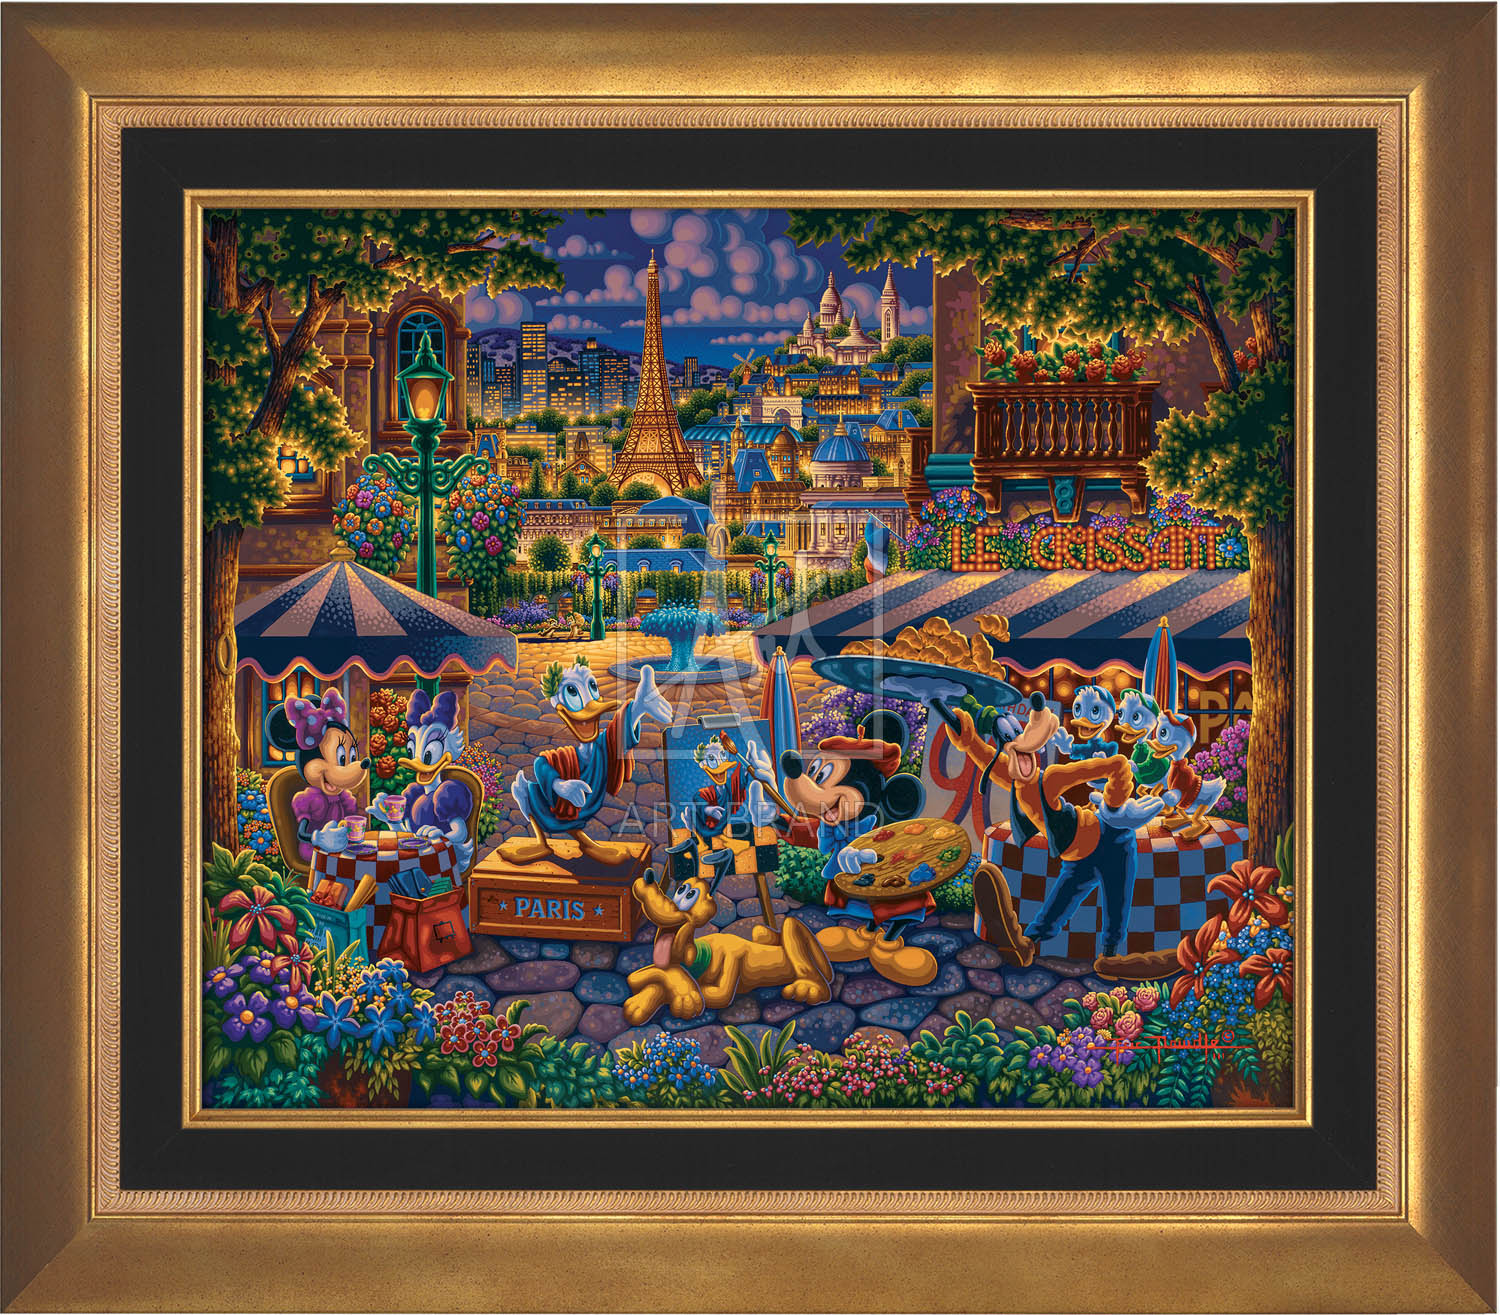 Mickey Mouse and Donald Duck playing the part of both artist and model, as they enjoy the company of friends, in the courtyard plaza in Paris - Aurora Gold Frame